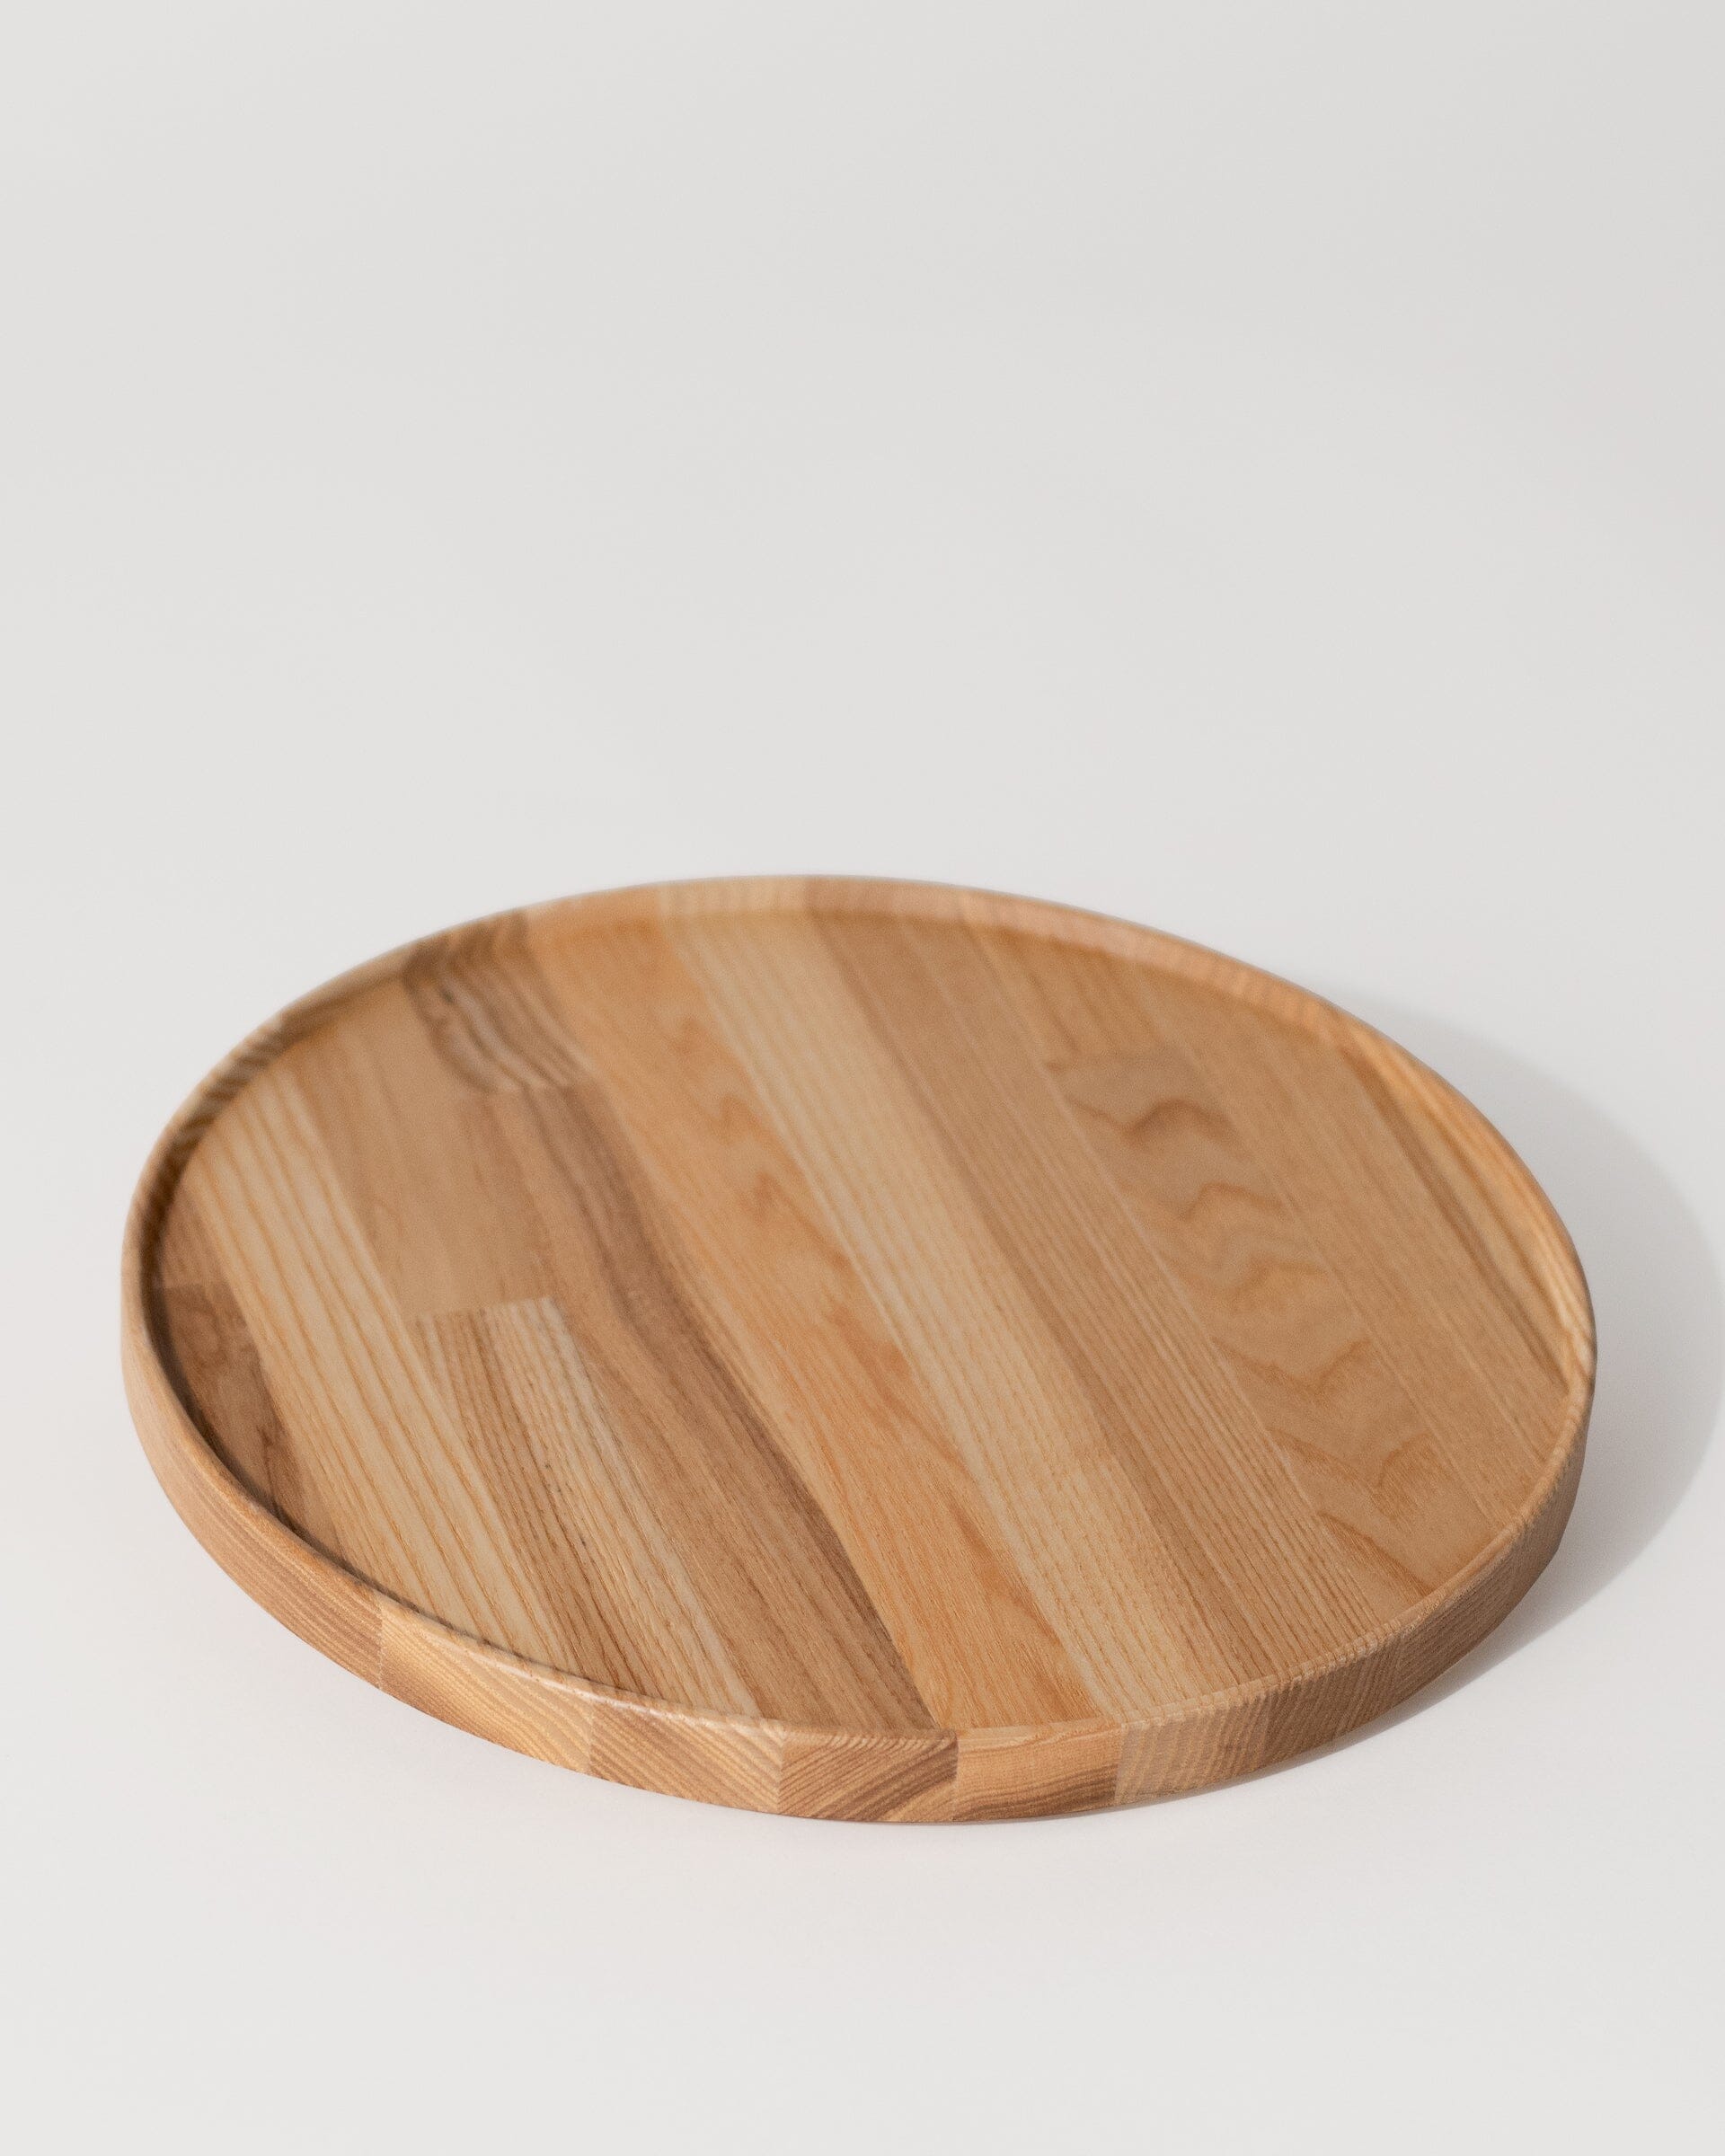 Hasami Ash Wooden Tray in large 